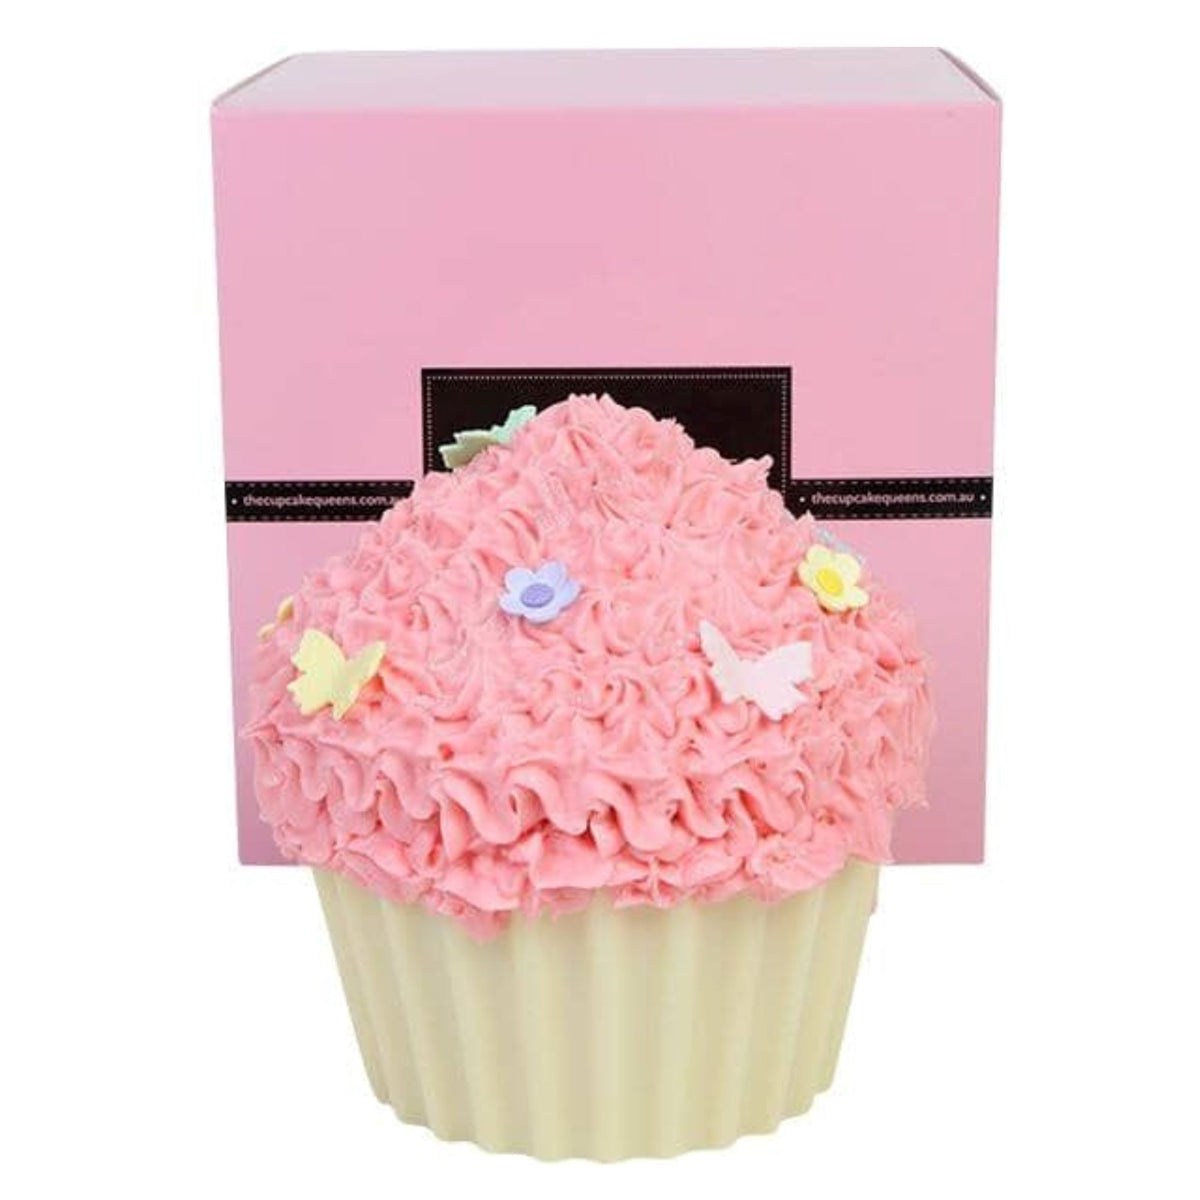 Pink Vanilla Giant Cupcake with Butterflies and Blossom Flowers Cakes The Cupcake Queens 